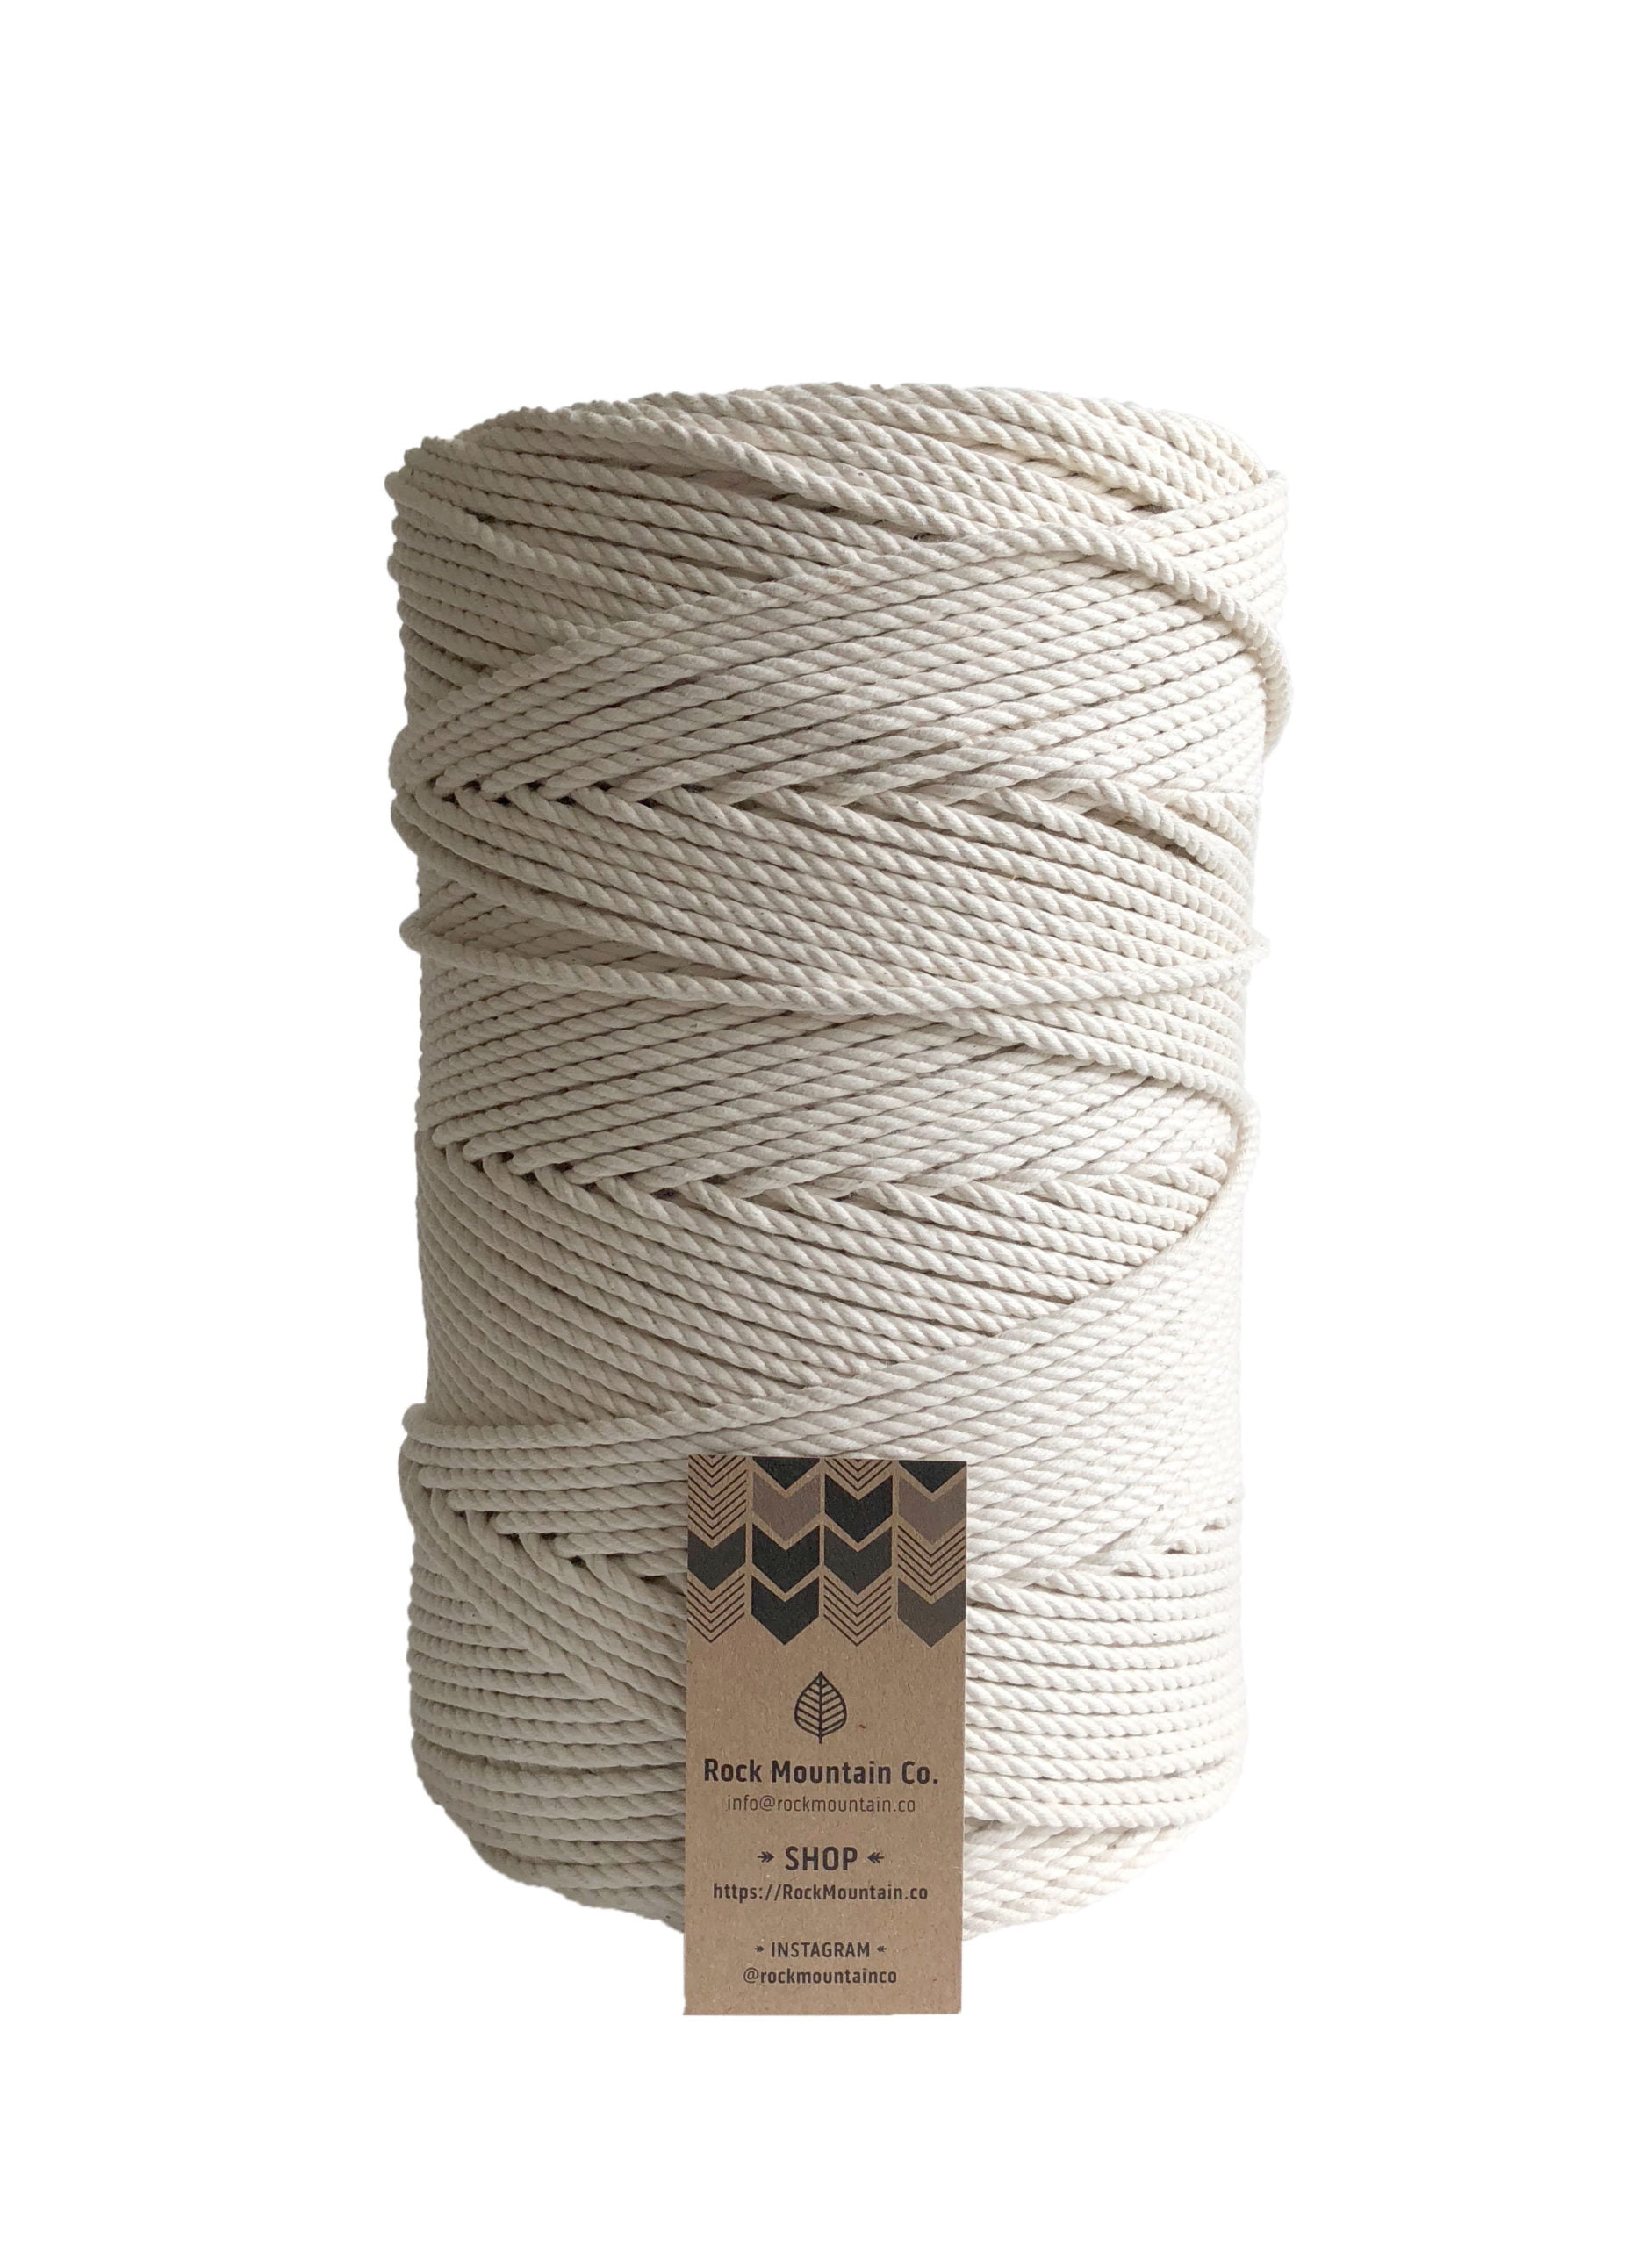 4MM Diameter 50M Length Rope That Comes in Spools Soft to The Touch and Super Versatile PARACORD PLANET Great for DIY Crafting Make Handmade Macramé Colorful Cotton Rope